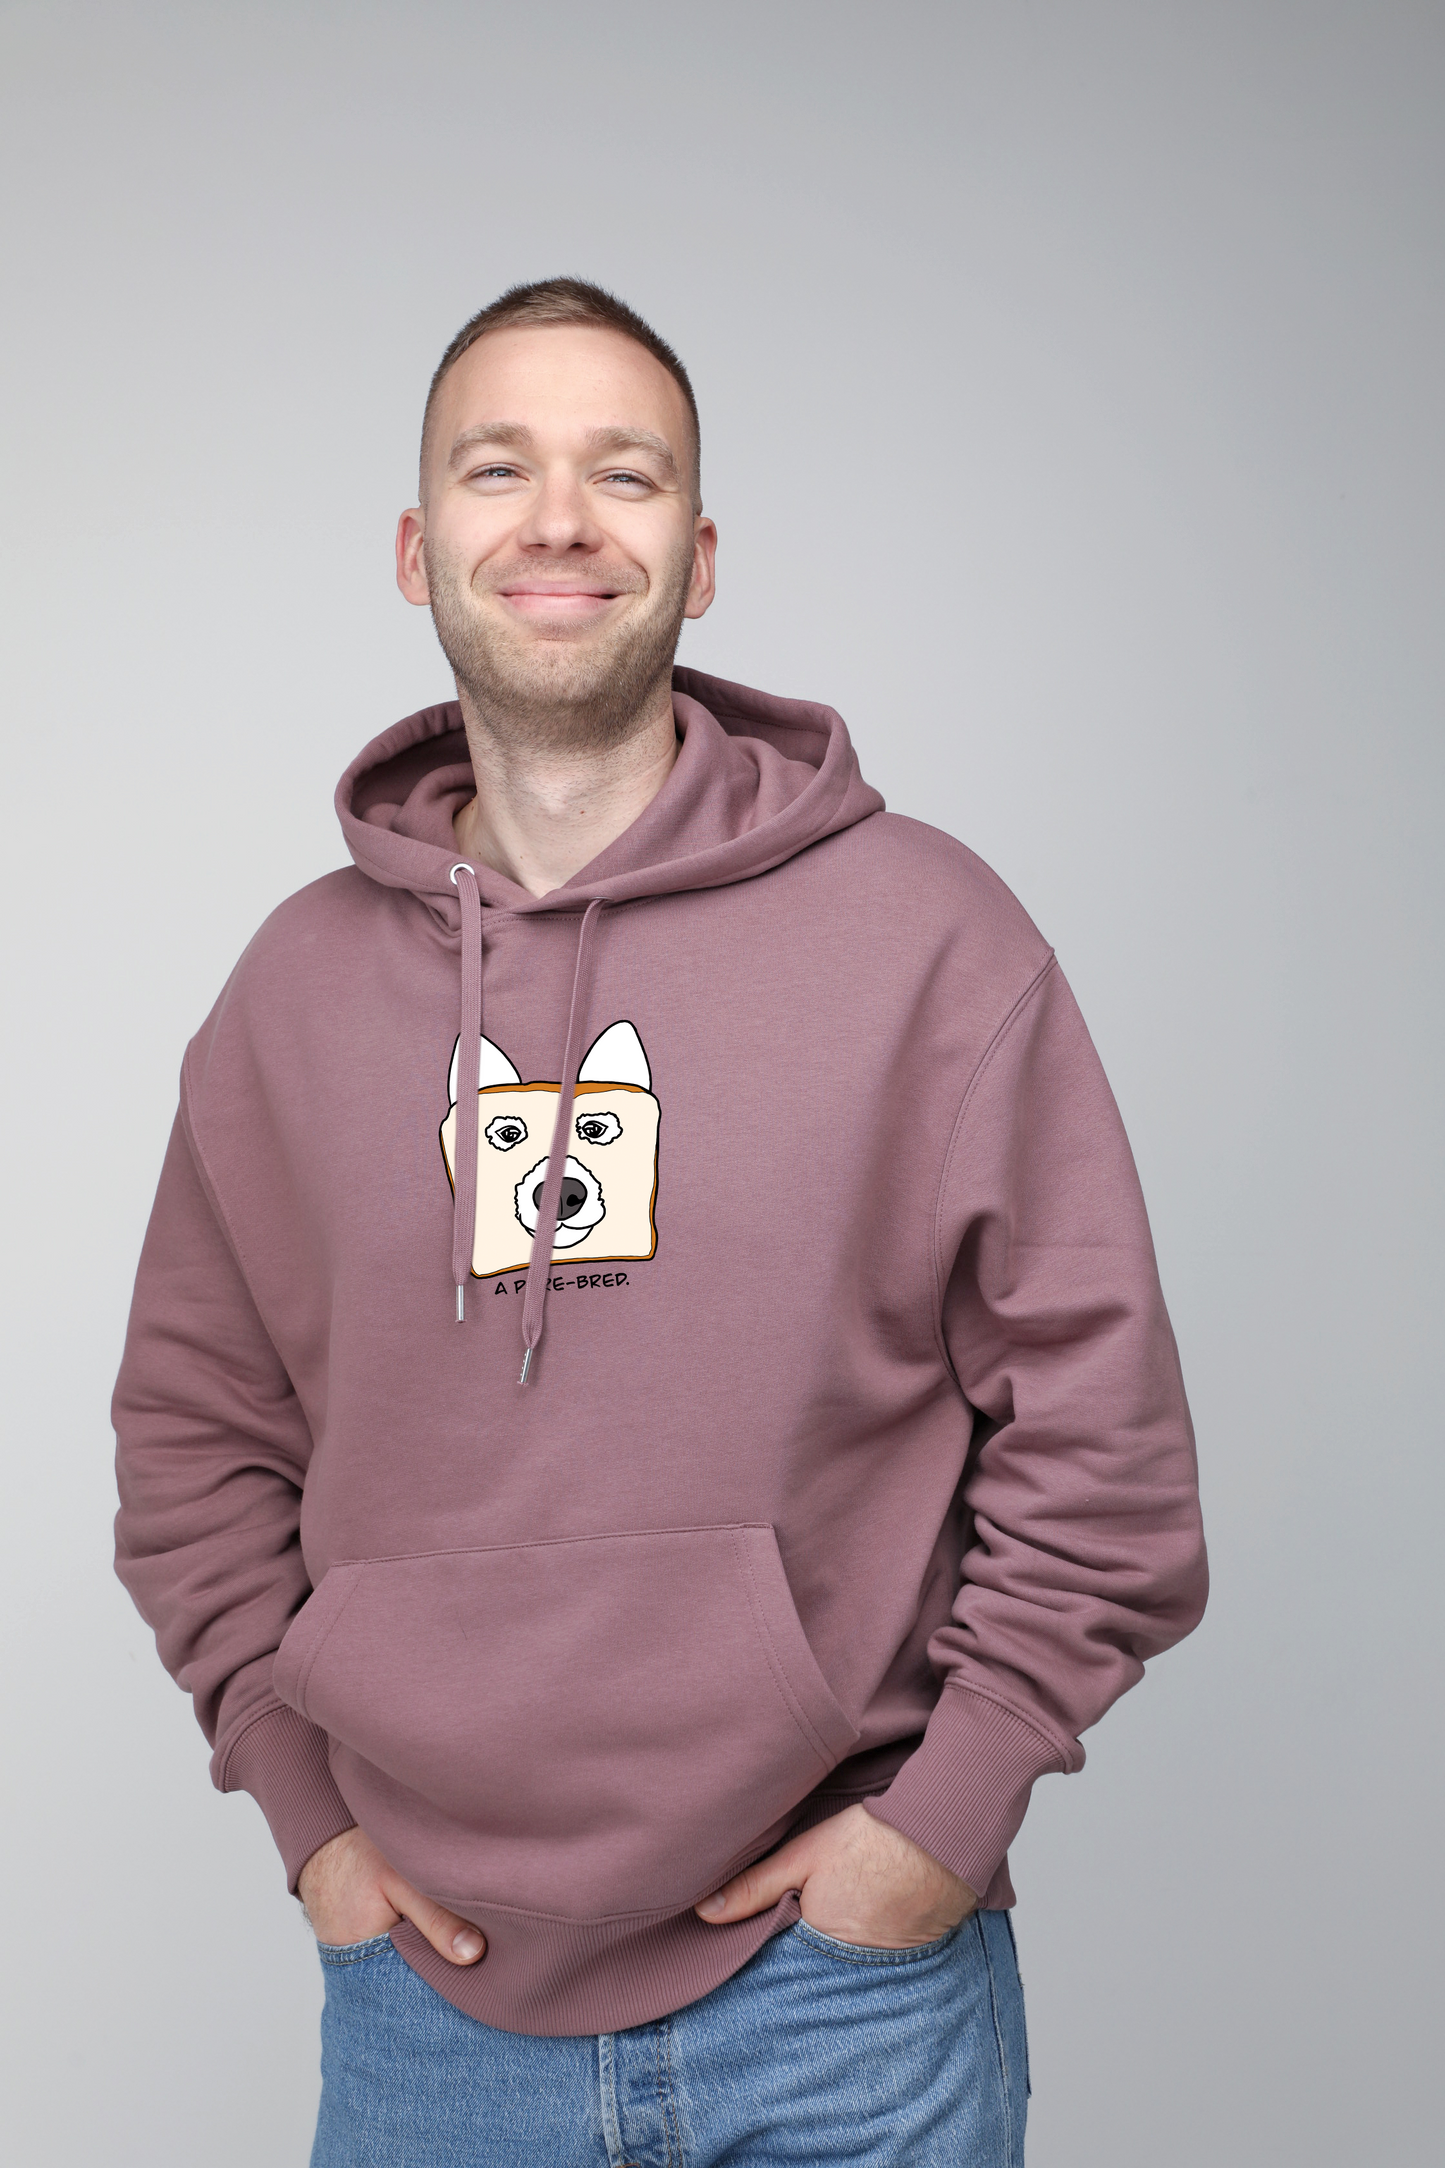 Pure-bred dog | Hoodie with dog. Oversize fit | Unisex by My Wild Other